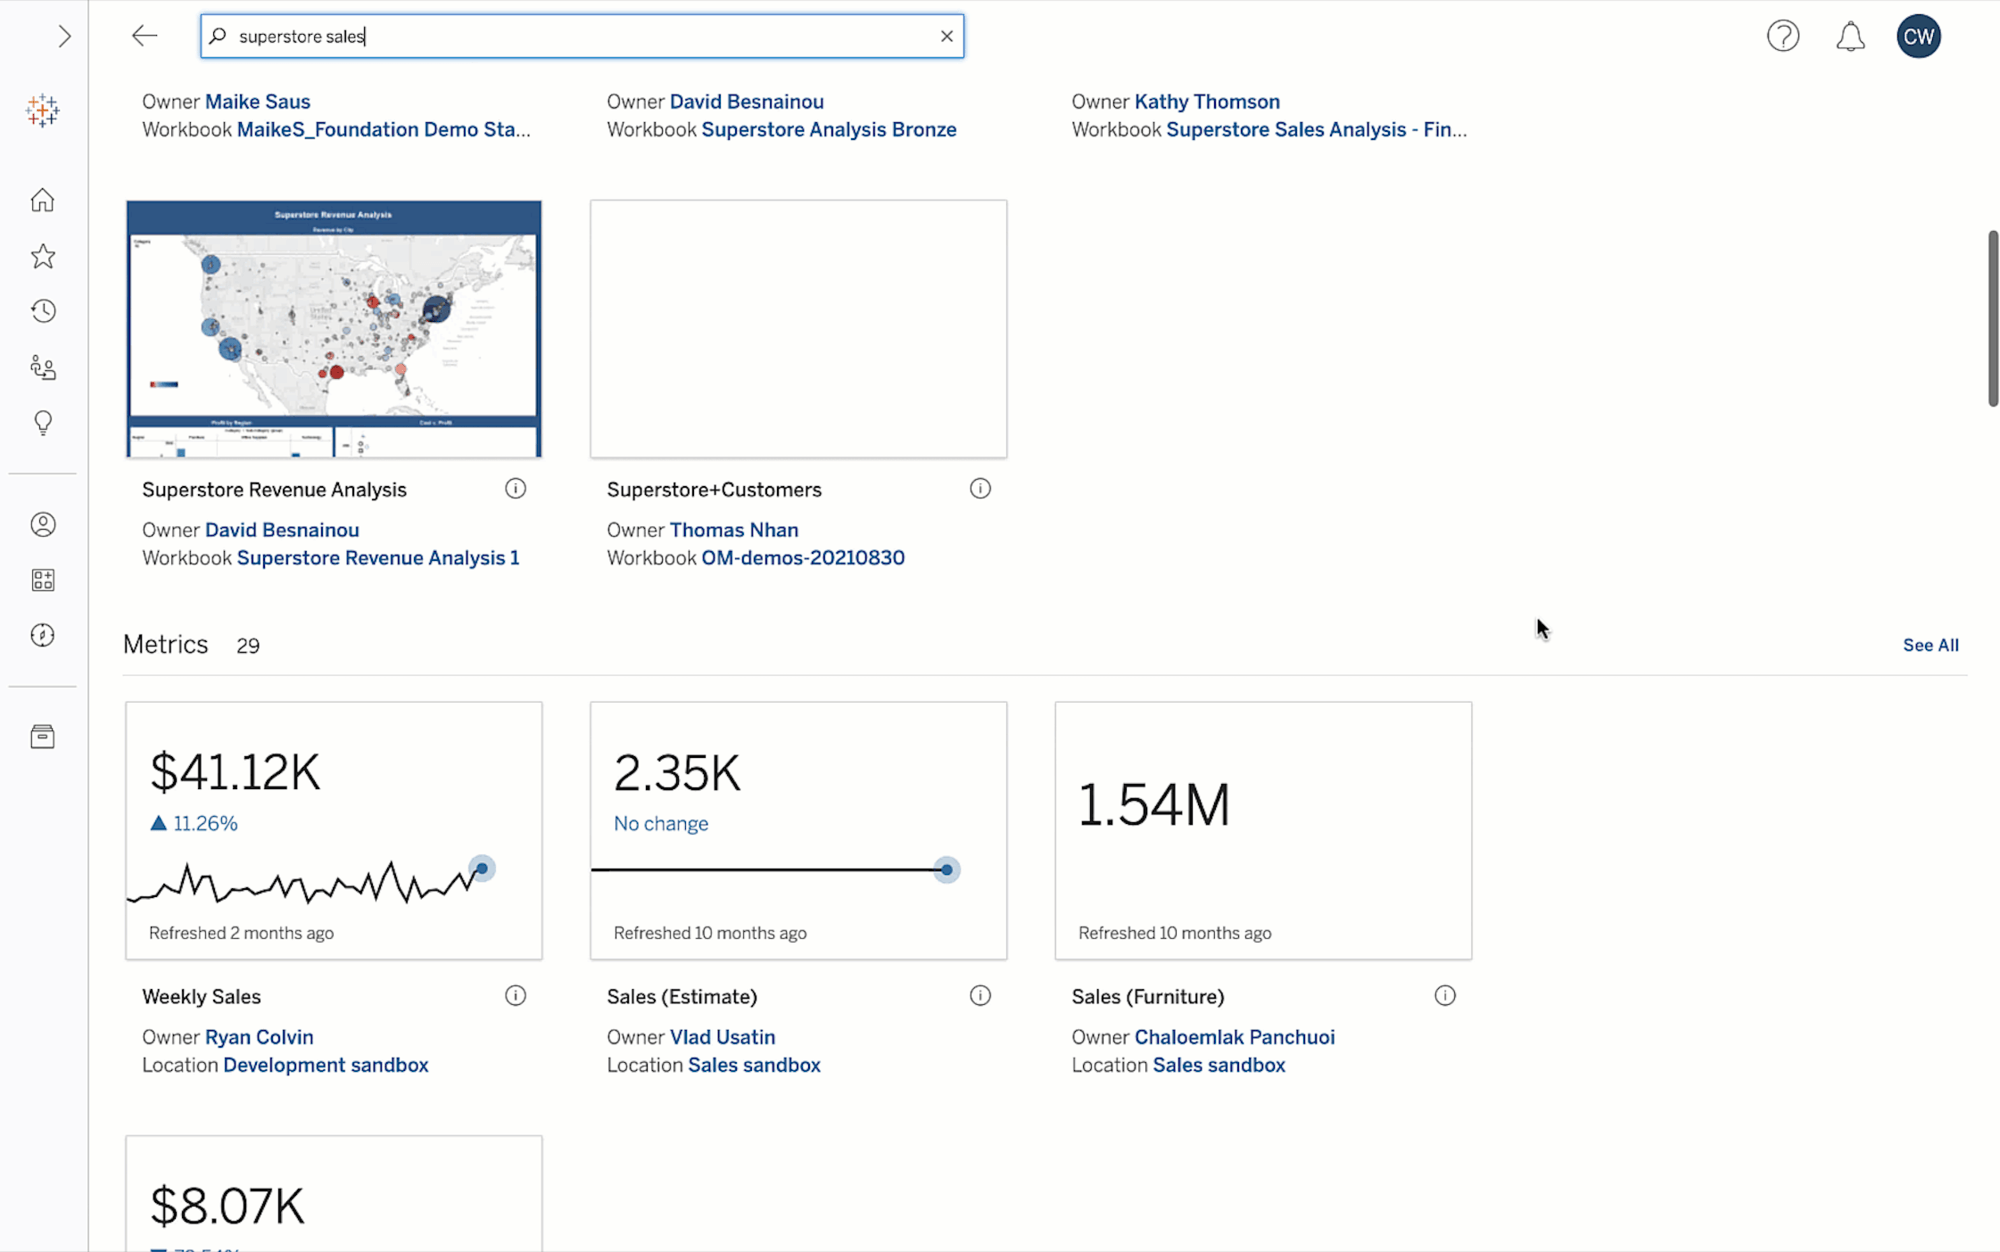 Reimagined Tableau Search Results